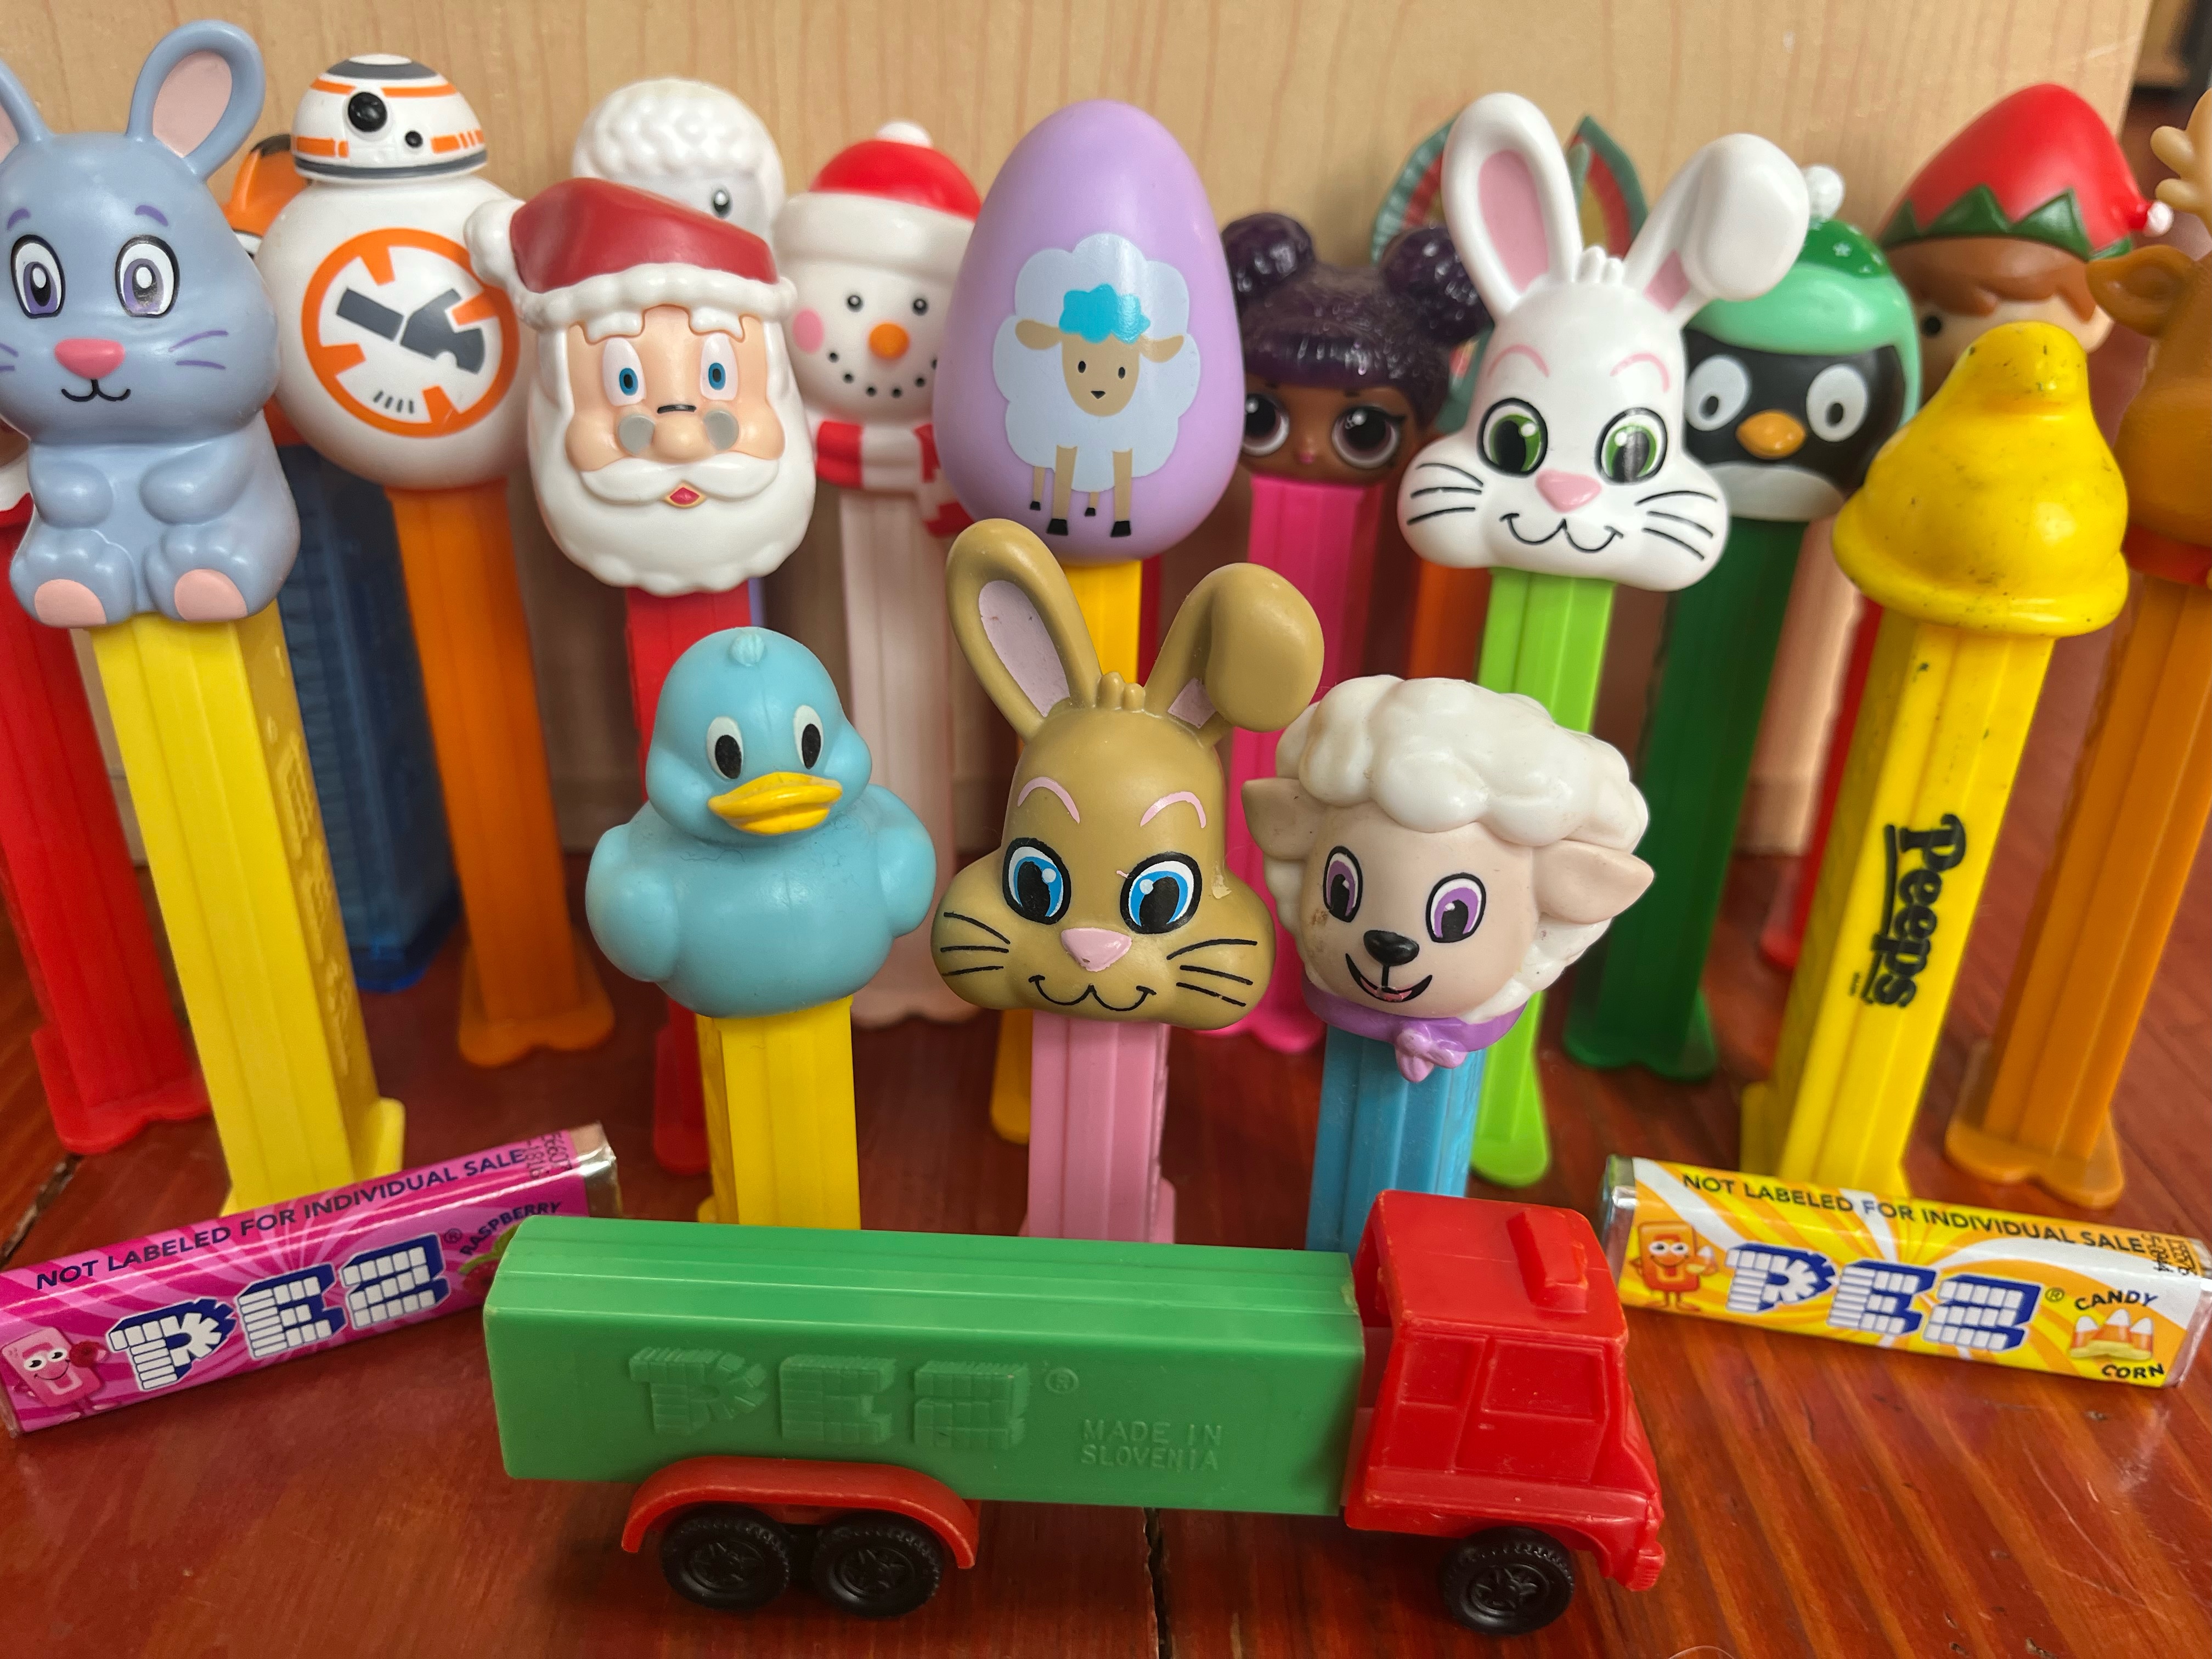 Kids of All Ages Love Pez Dispensers